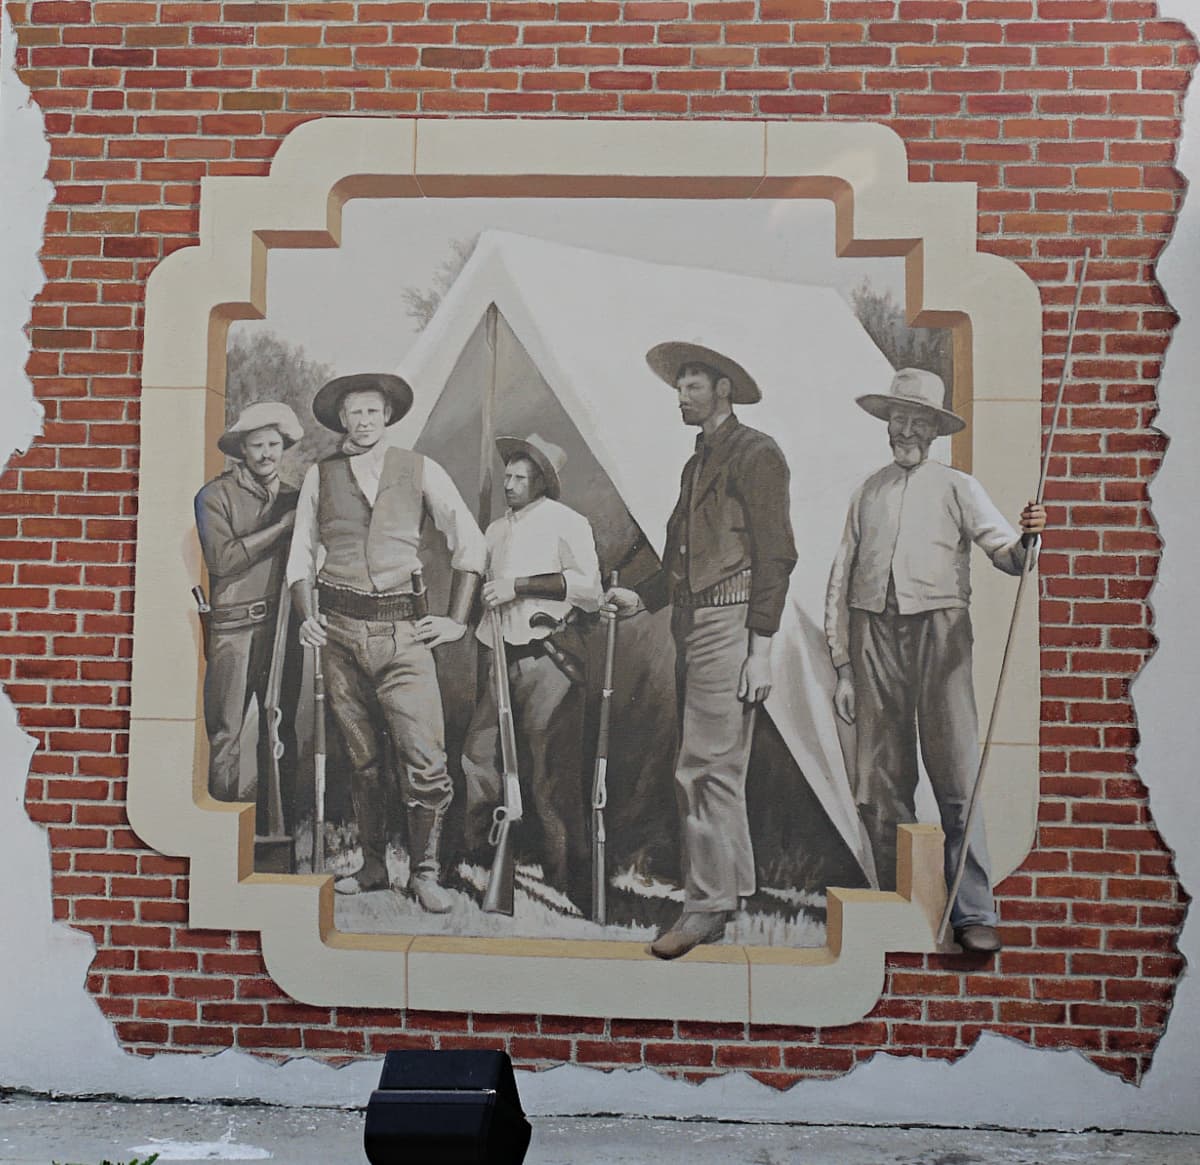 Mural of cowboys in front of a canvas tent, painted in the style of an old-timey photo.